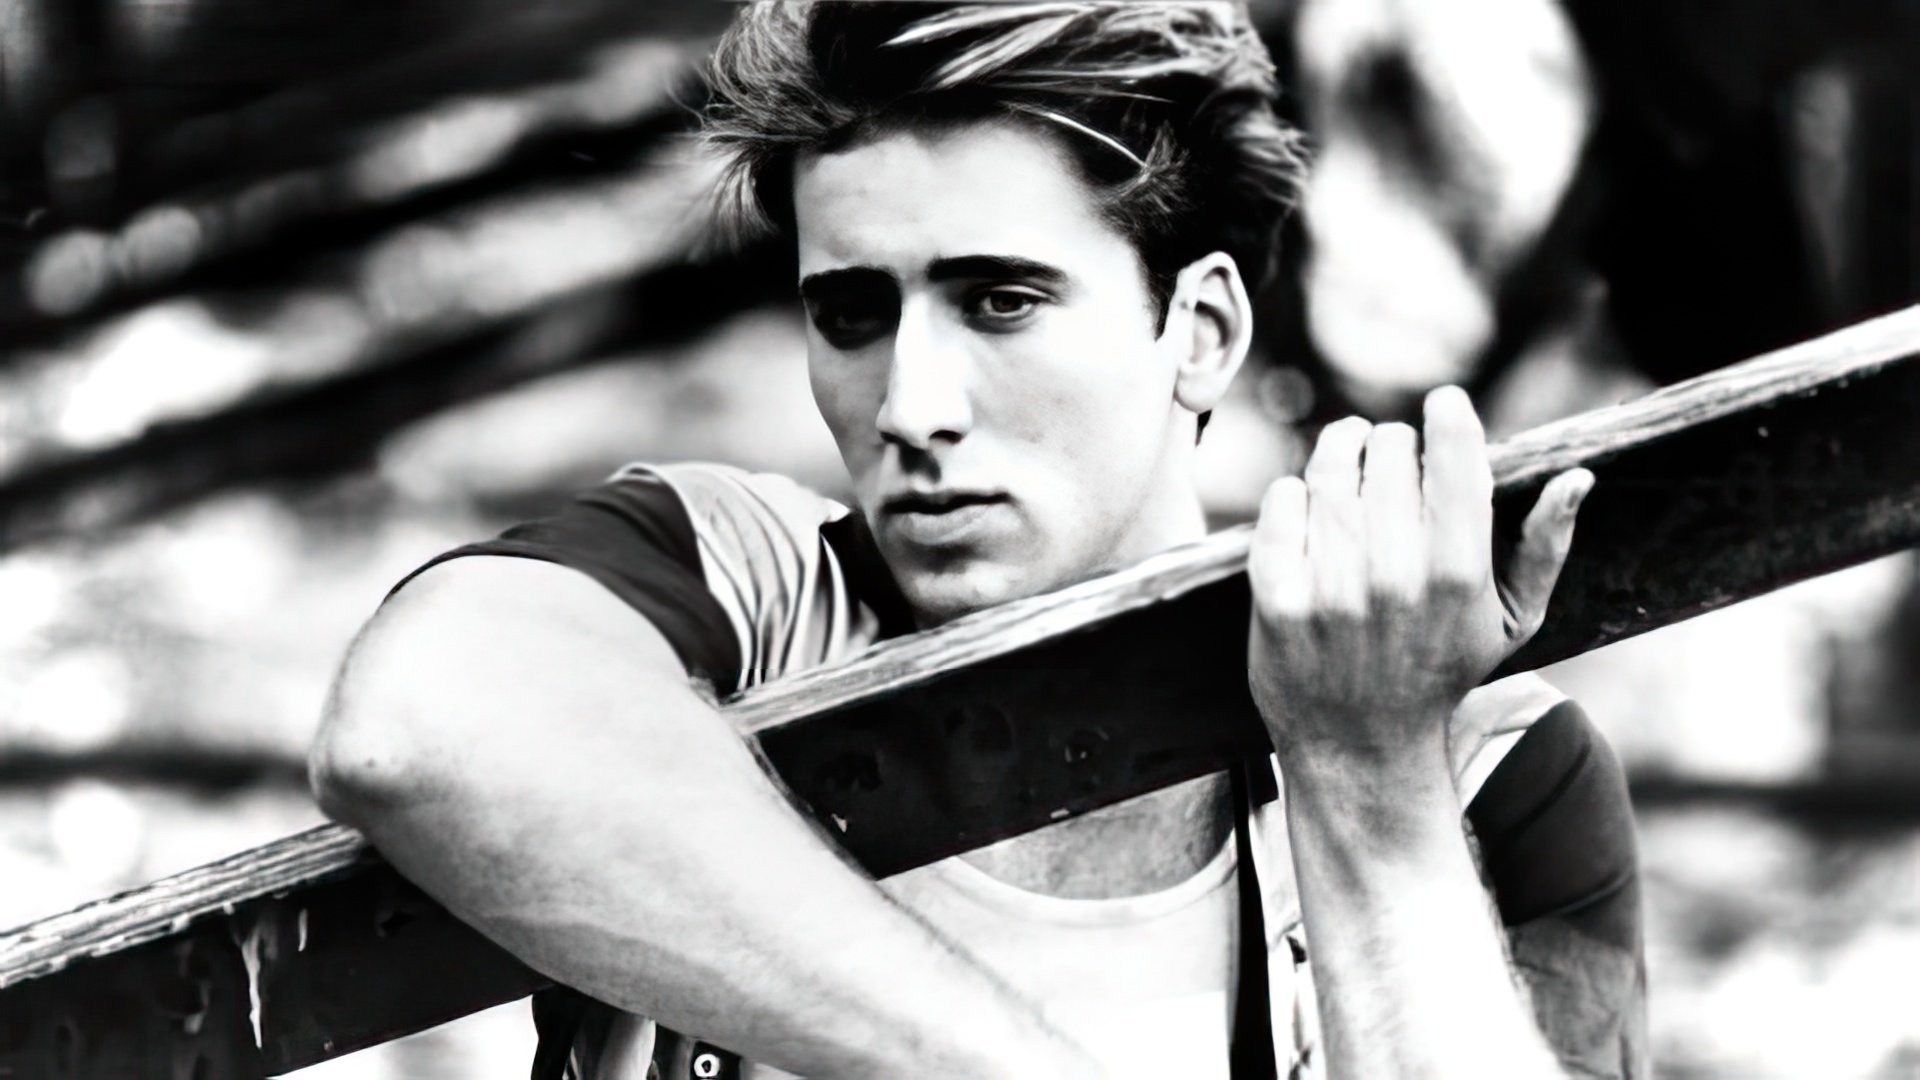 Acting career of Nicolas Cage began in the 1980s